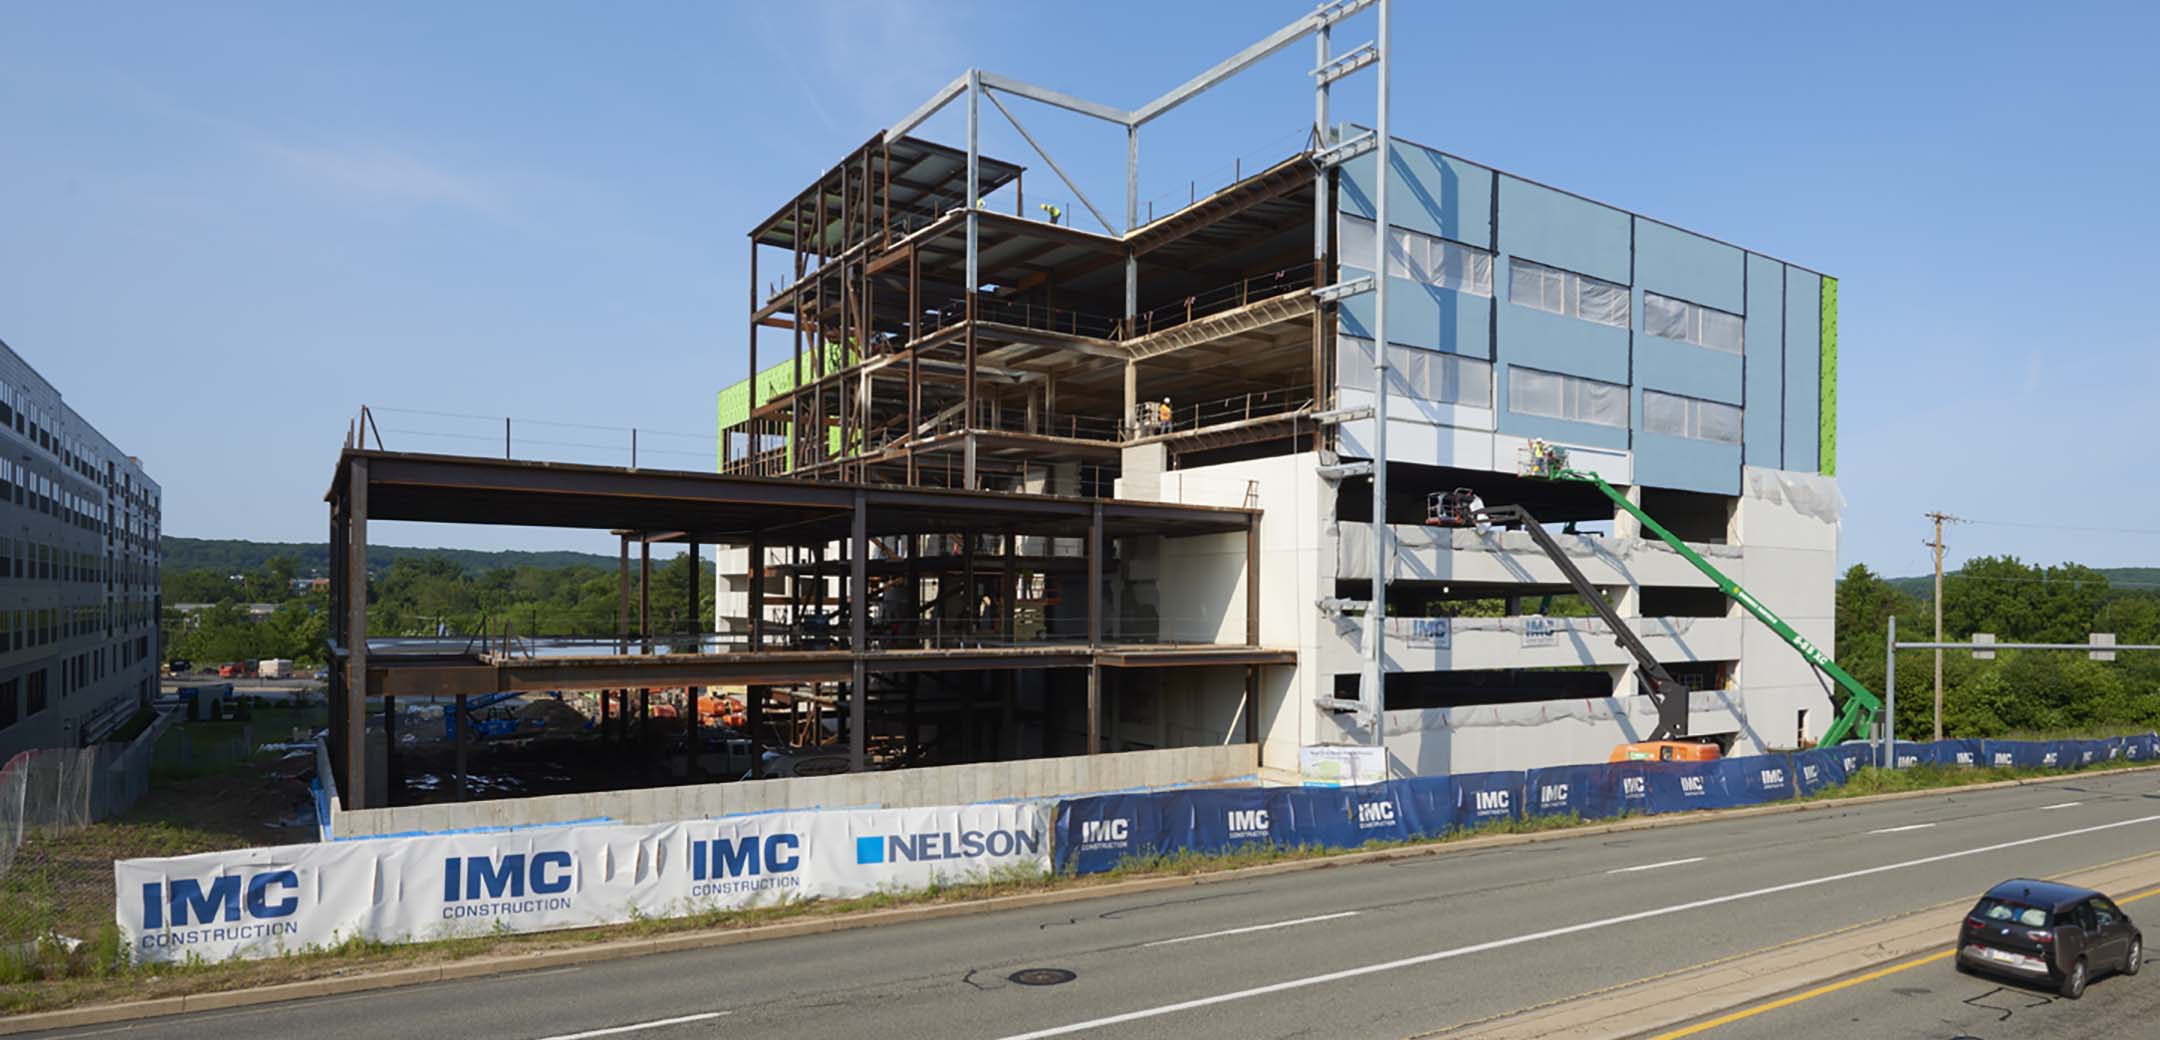 A view of the Main Line Health Center building showcasing the building during its construction phase, metal structure and insulation being applied.